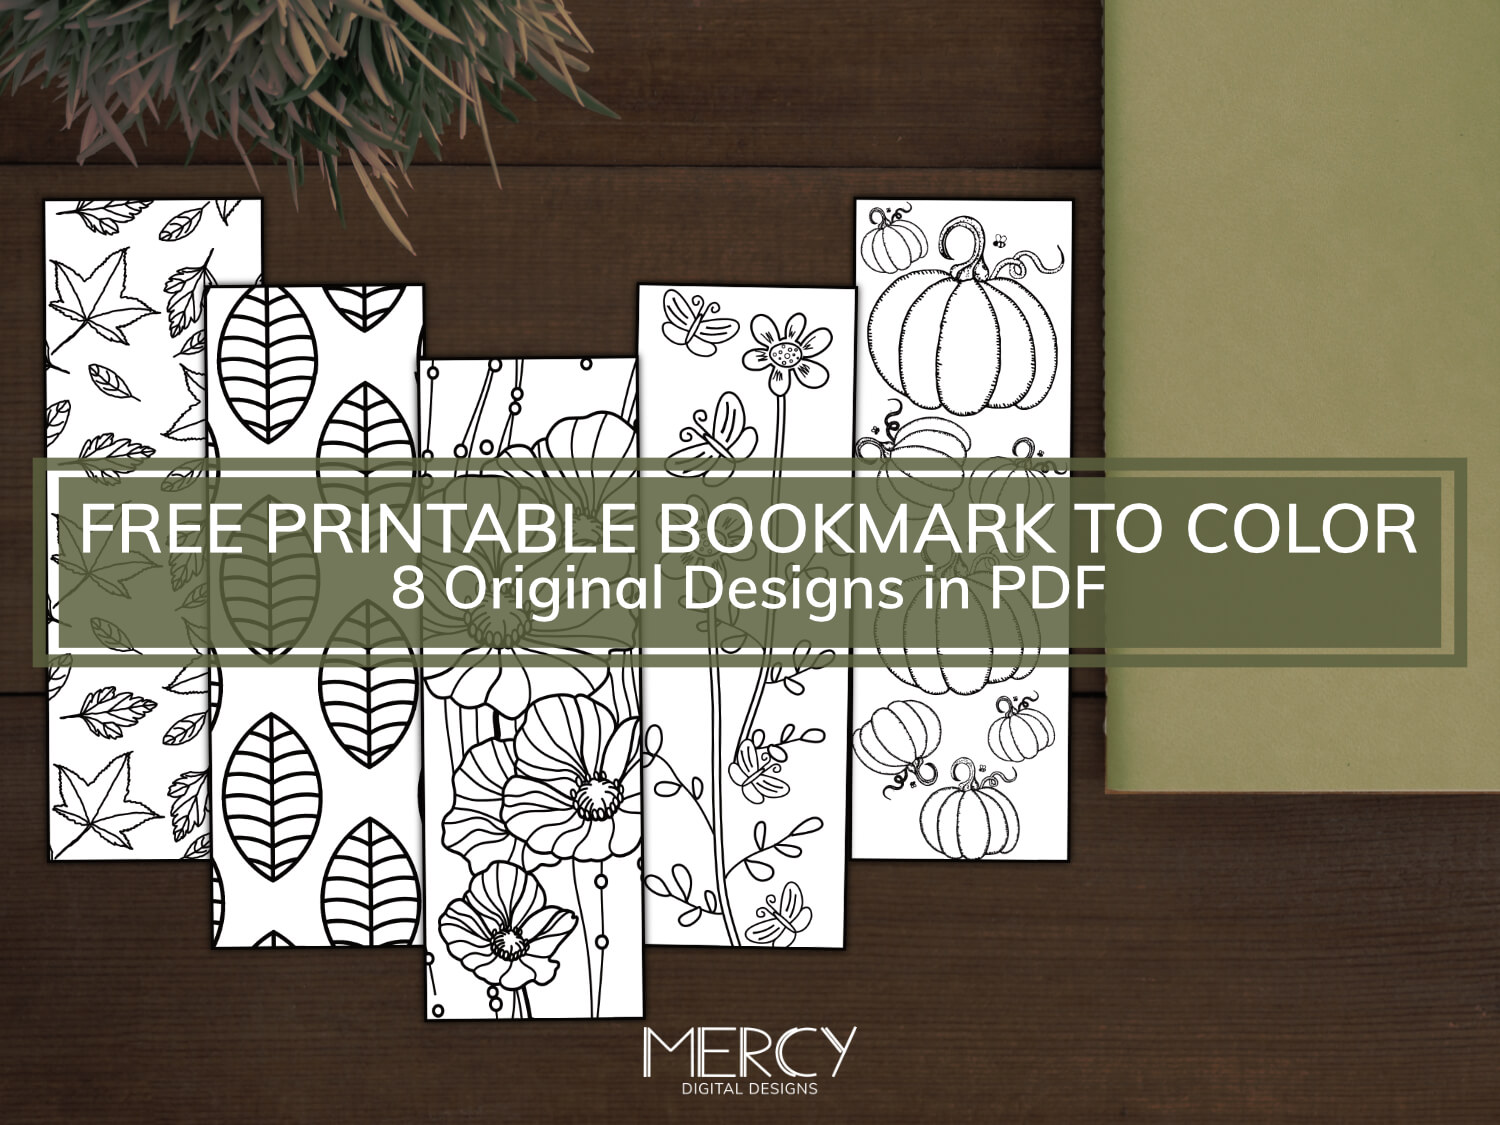 Free Printable Bookmark to Color